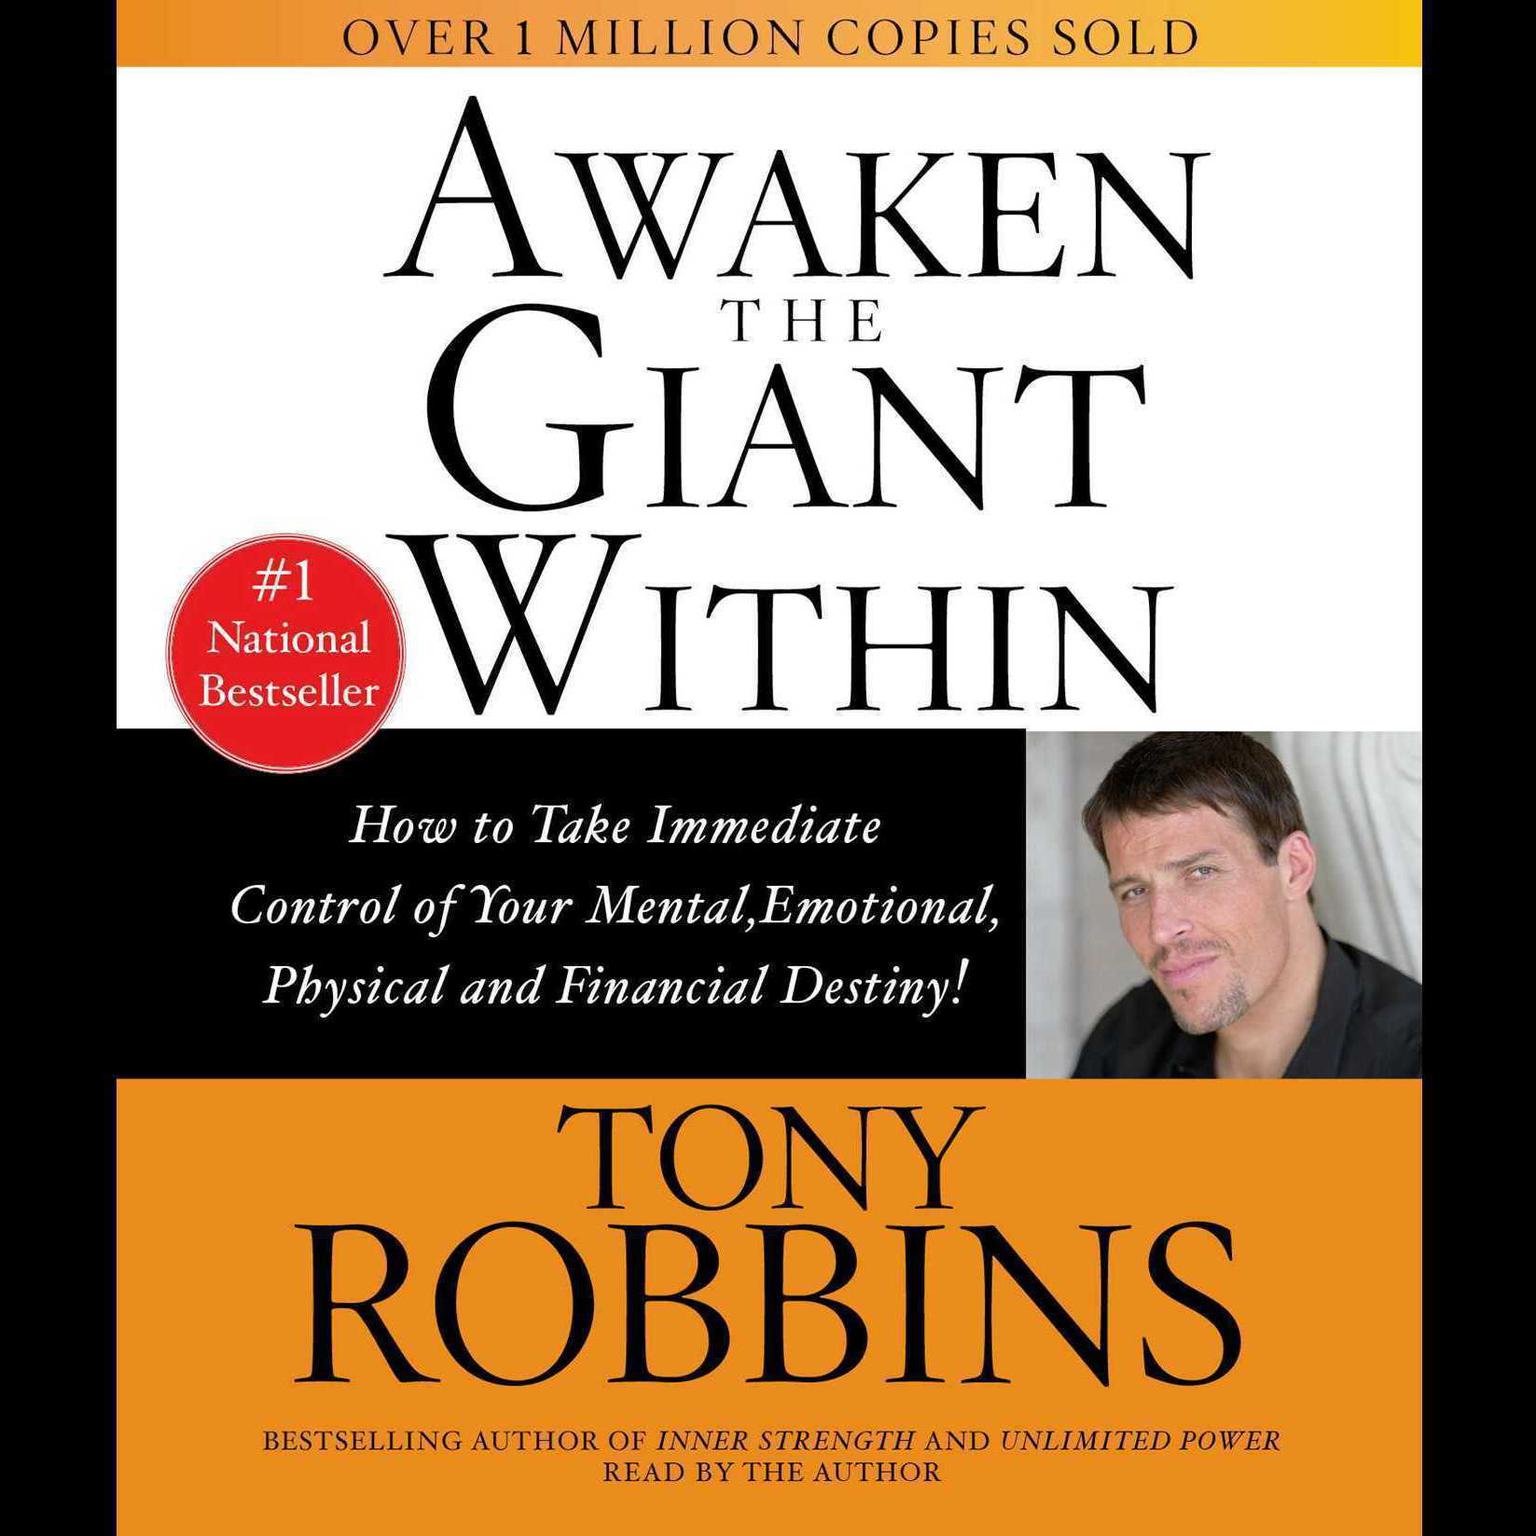 Awaken The Giant Within (Abridged): How to Take Immediate Control of Your Mental, Emotional, Physical, and Financial Destiny! Audiobook, by Tony Robbins